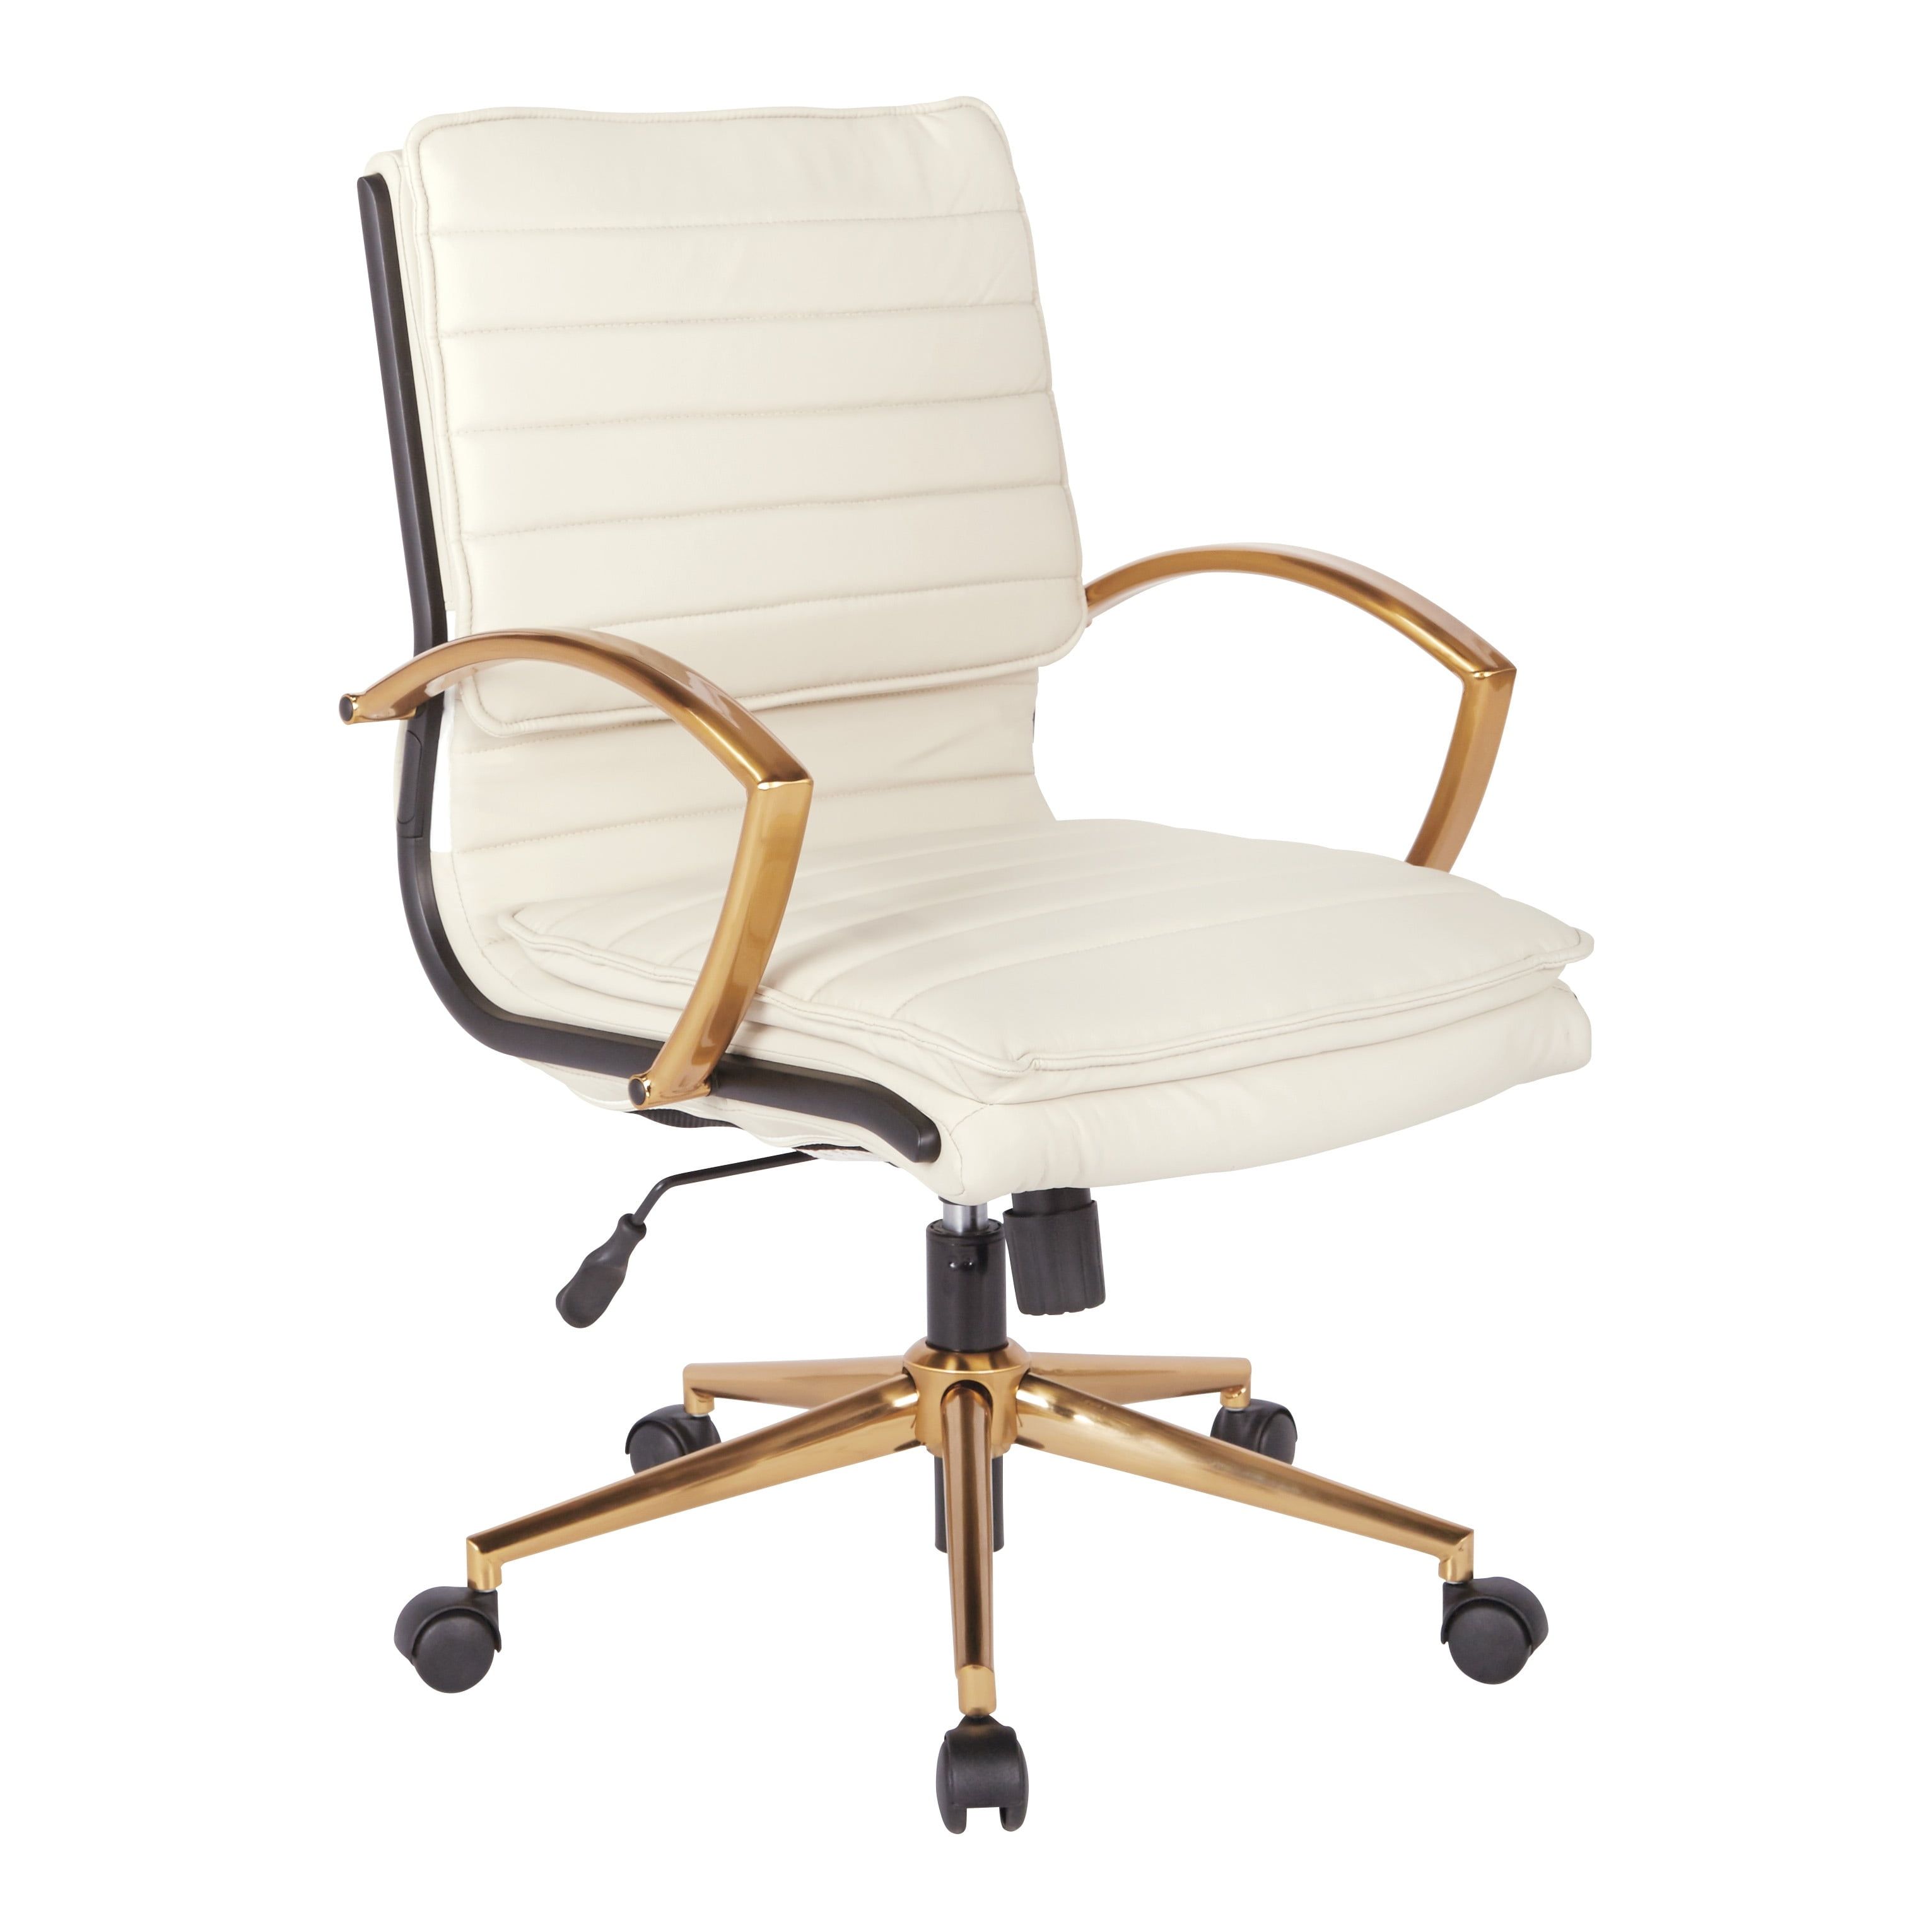 Cream Faux Leather Swivel Office Chair with Gold Accents